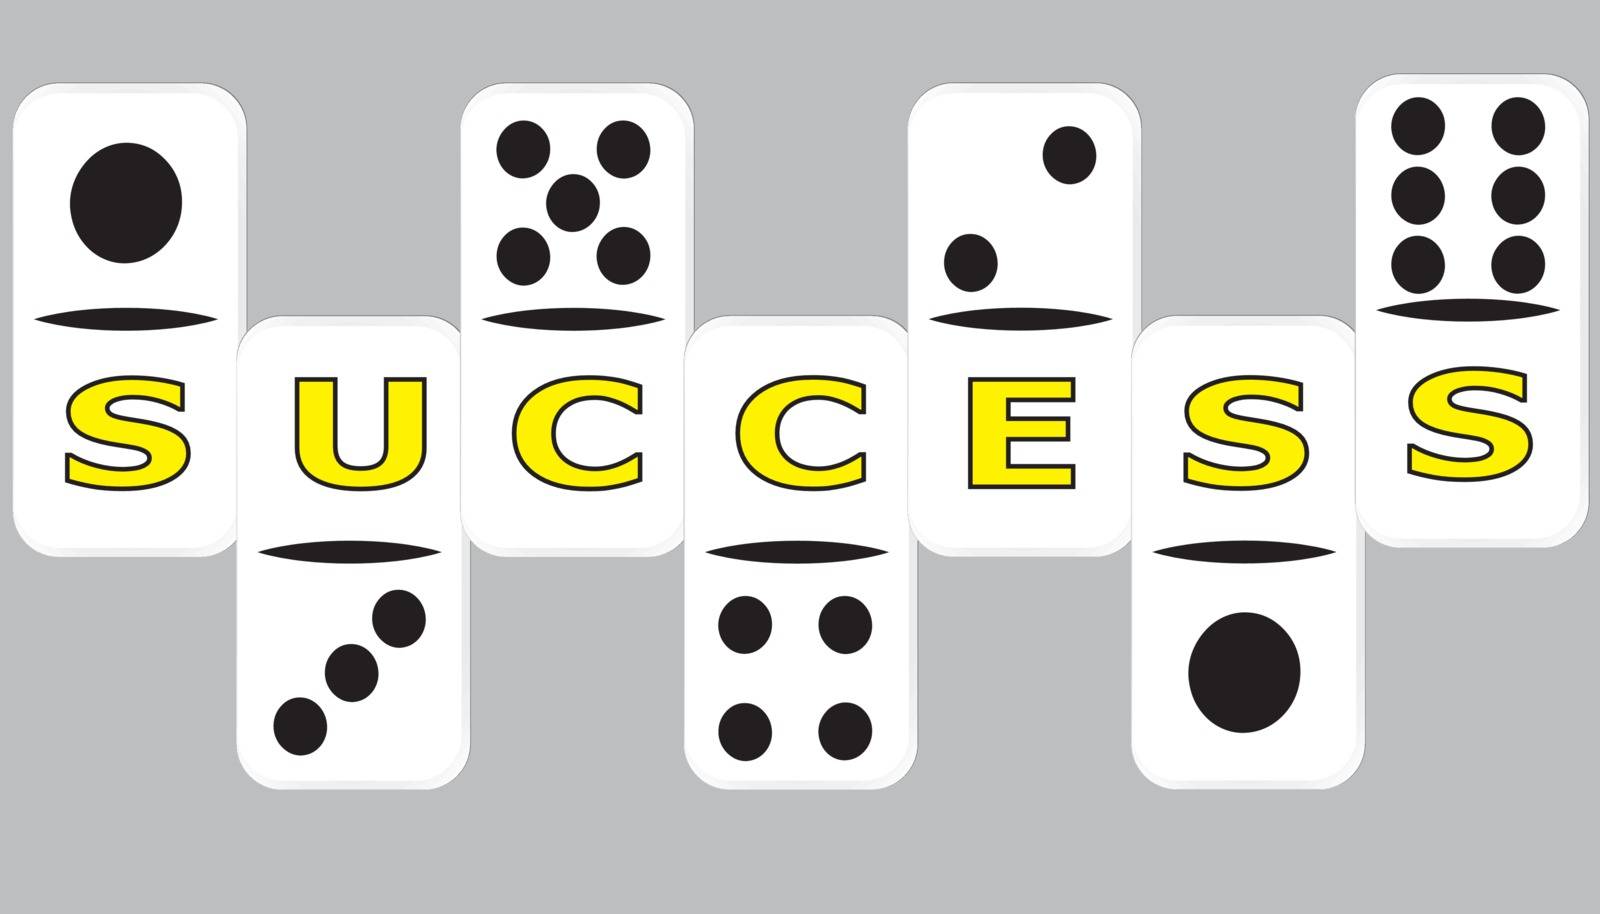 The choice of success row domino dot by dot.